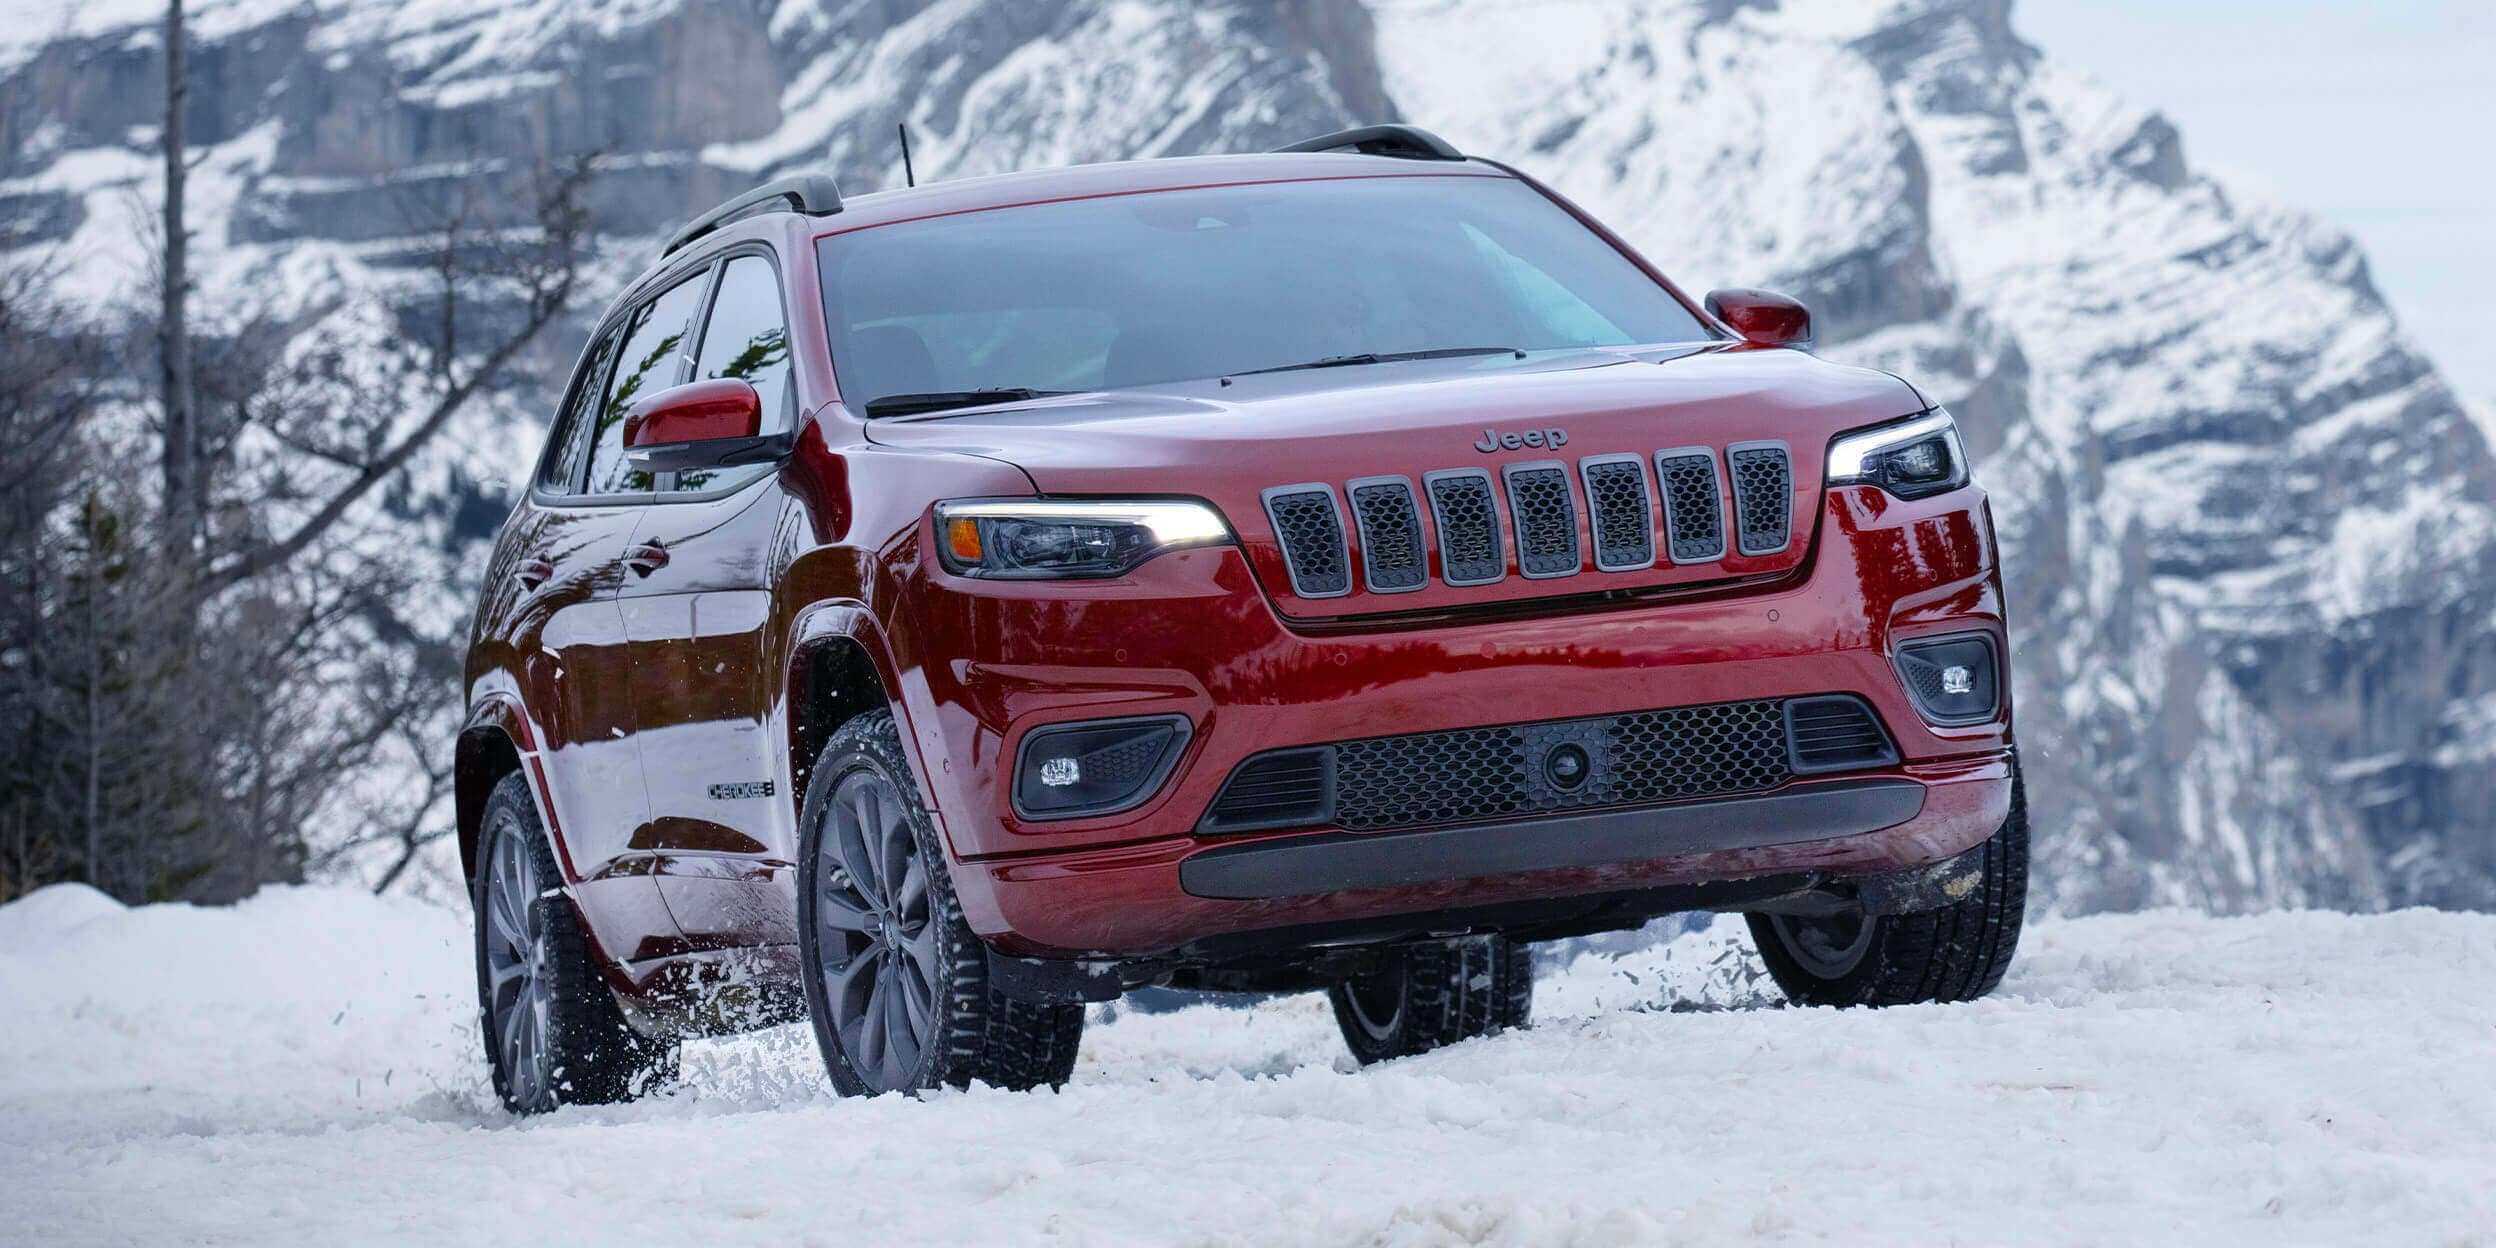 A velvet red 2022 Jeep Cherokee driving through the snow with the mountains visible in the distance